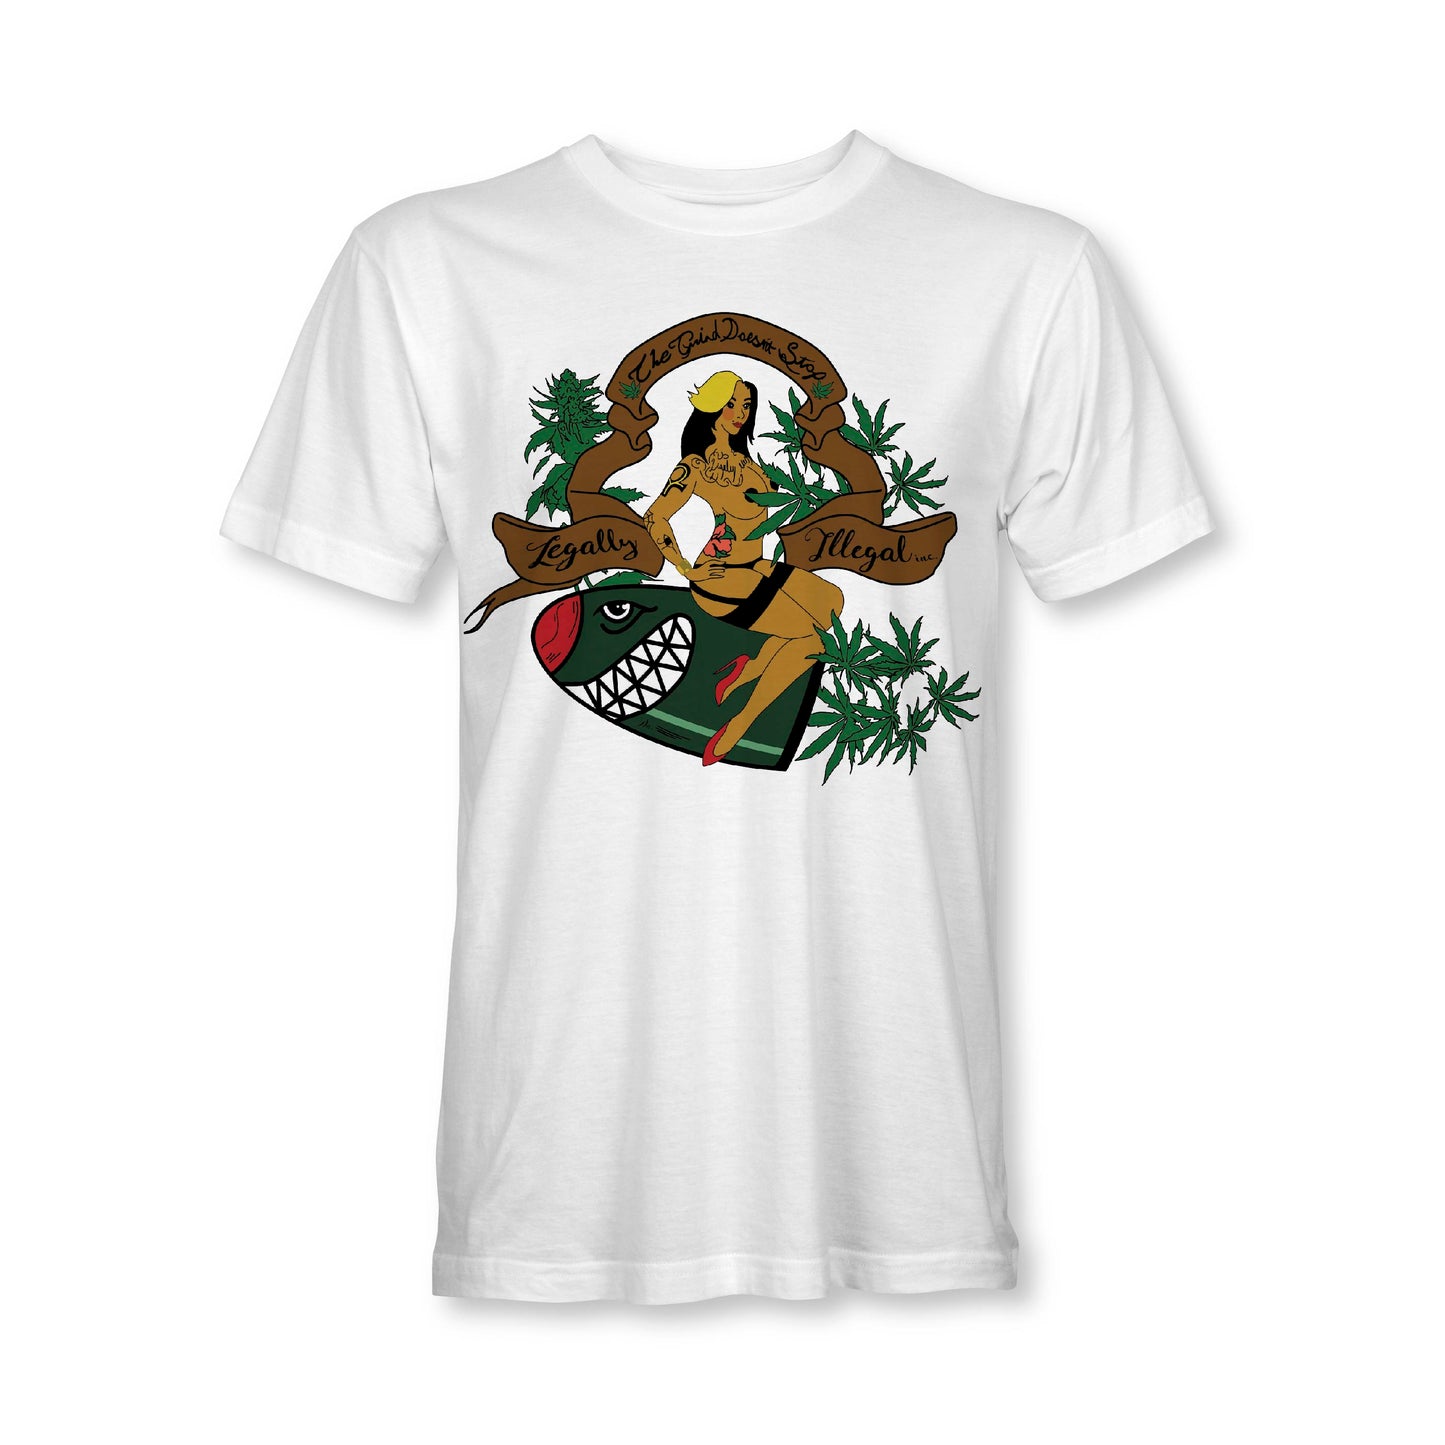 Tatted Lady Premium Tee